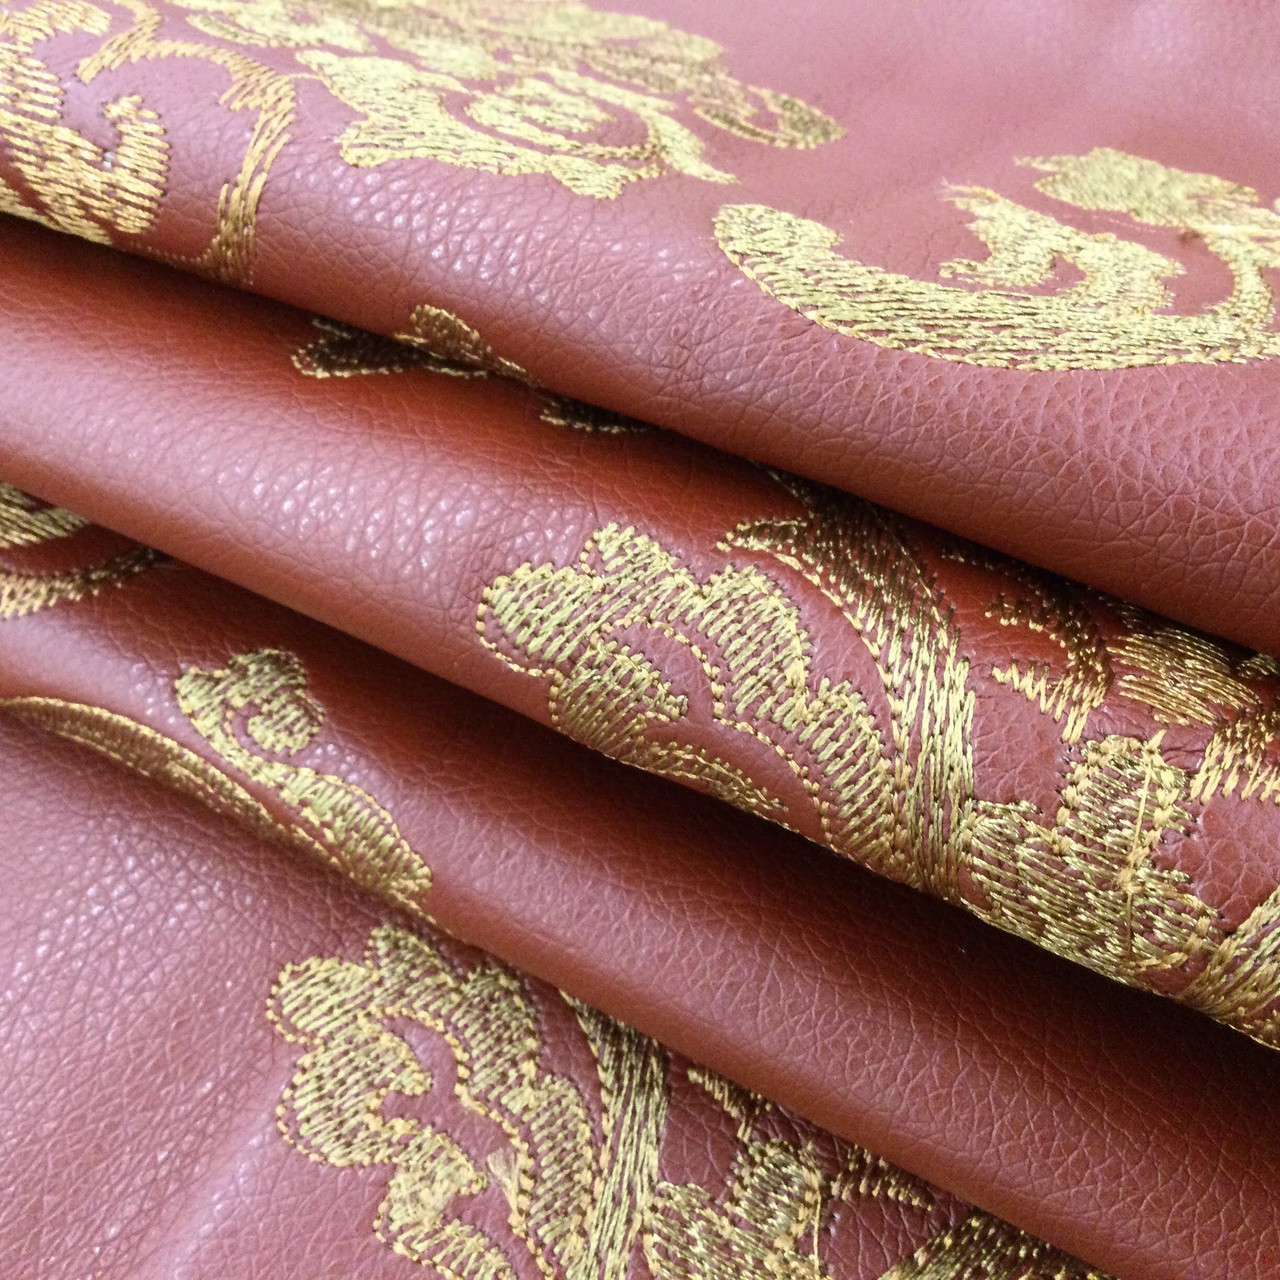 Cherry Red Faux Leather Vinyl Fabric | Upholstery | Heavyweight | 54 Wide |  By the Yard